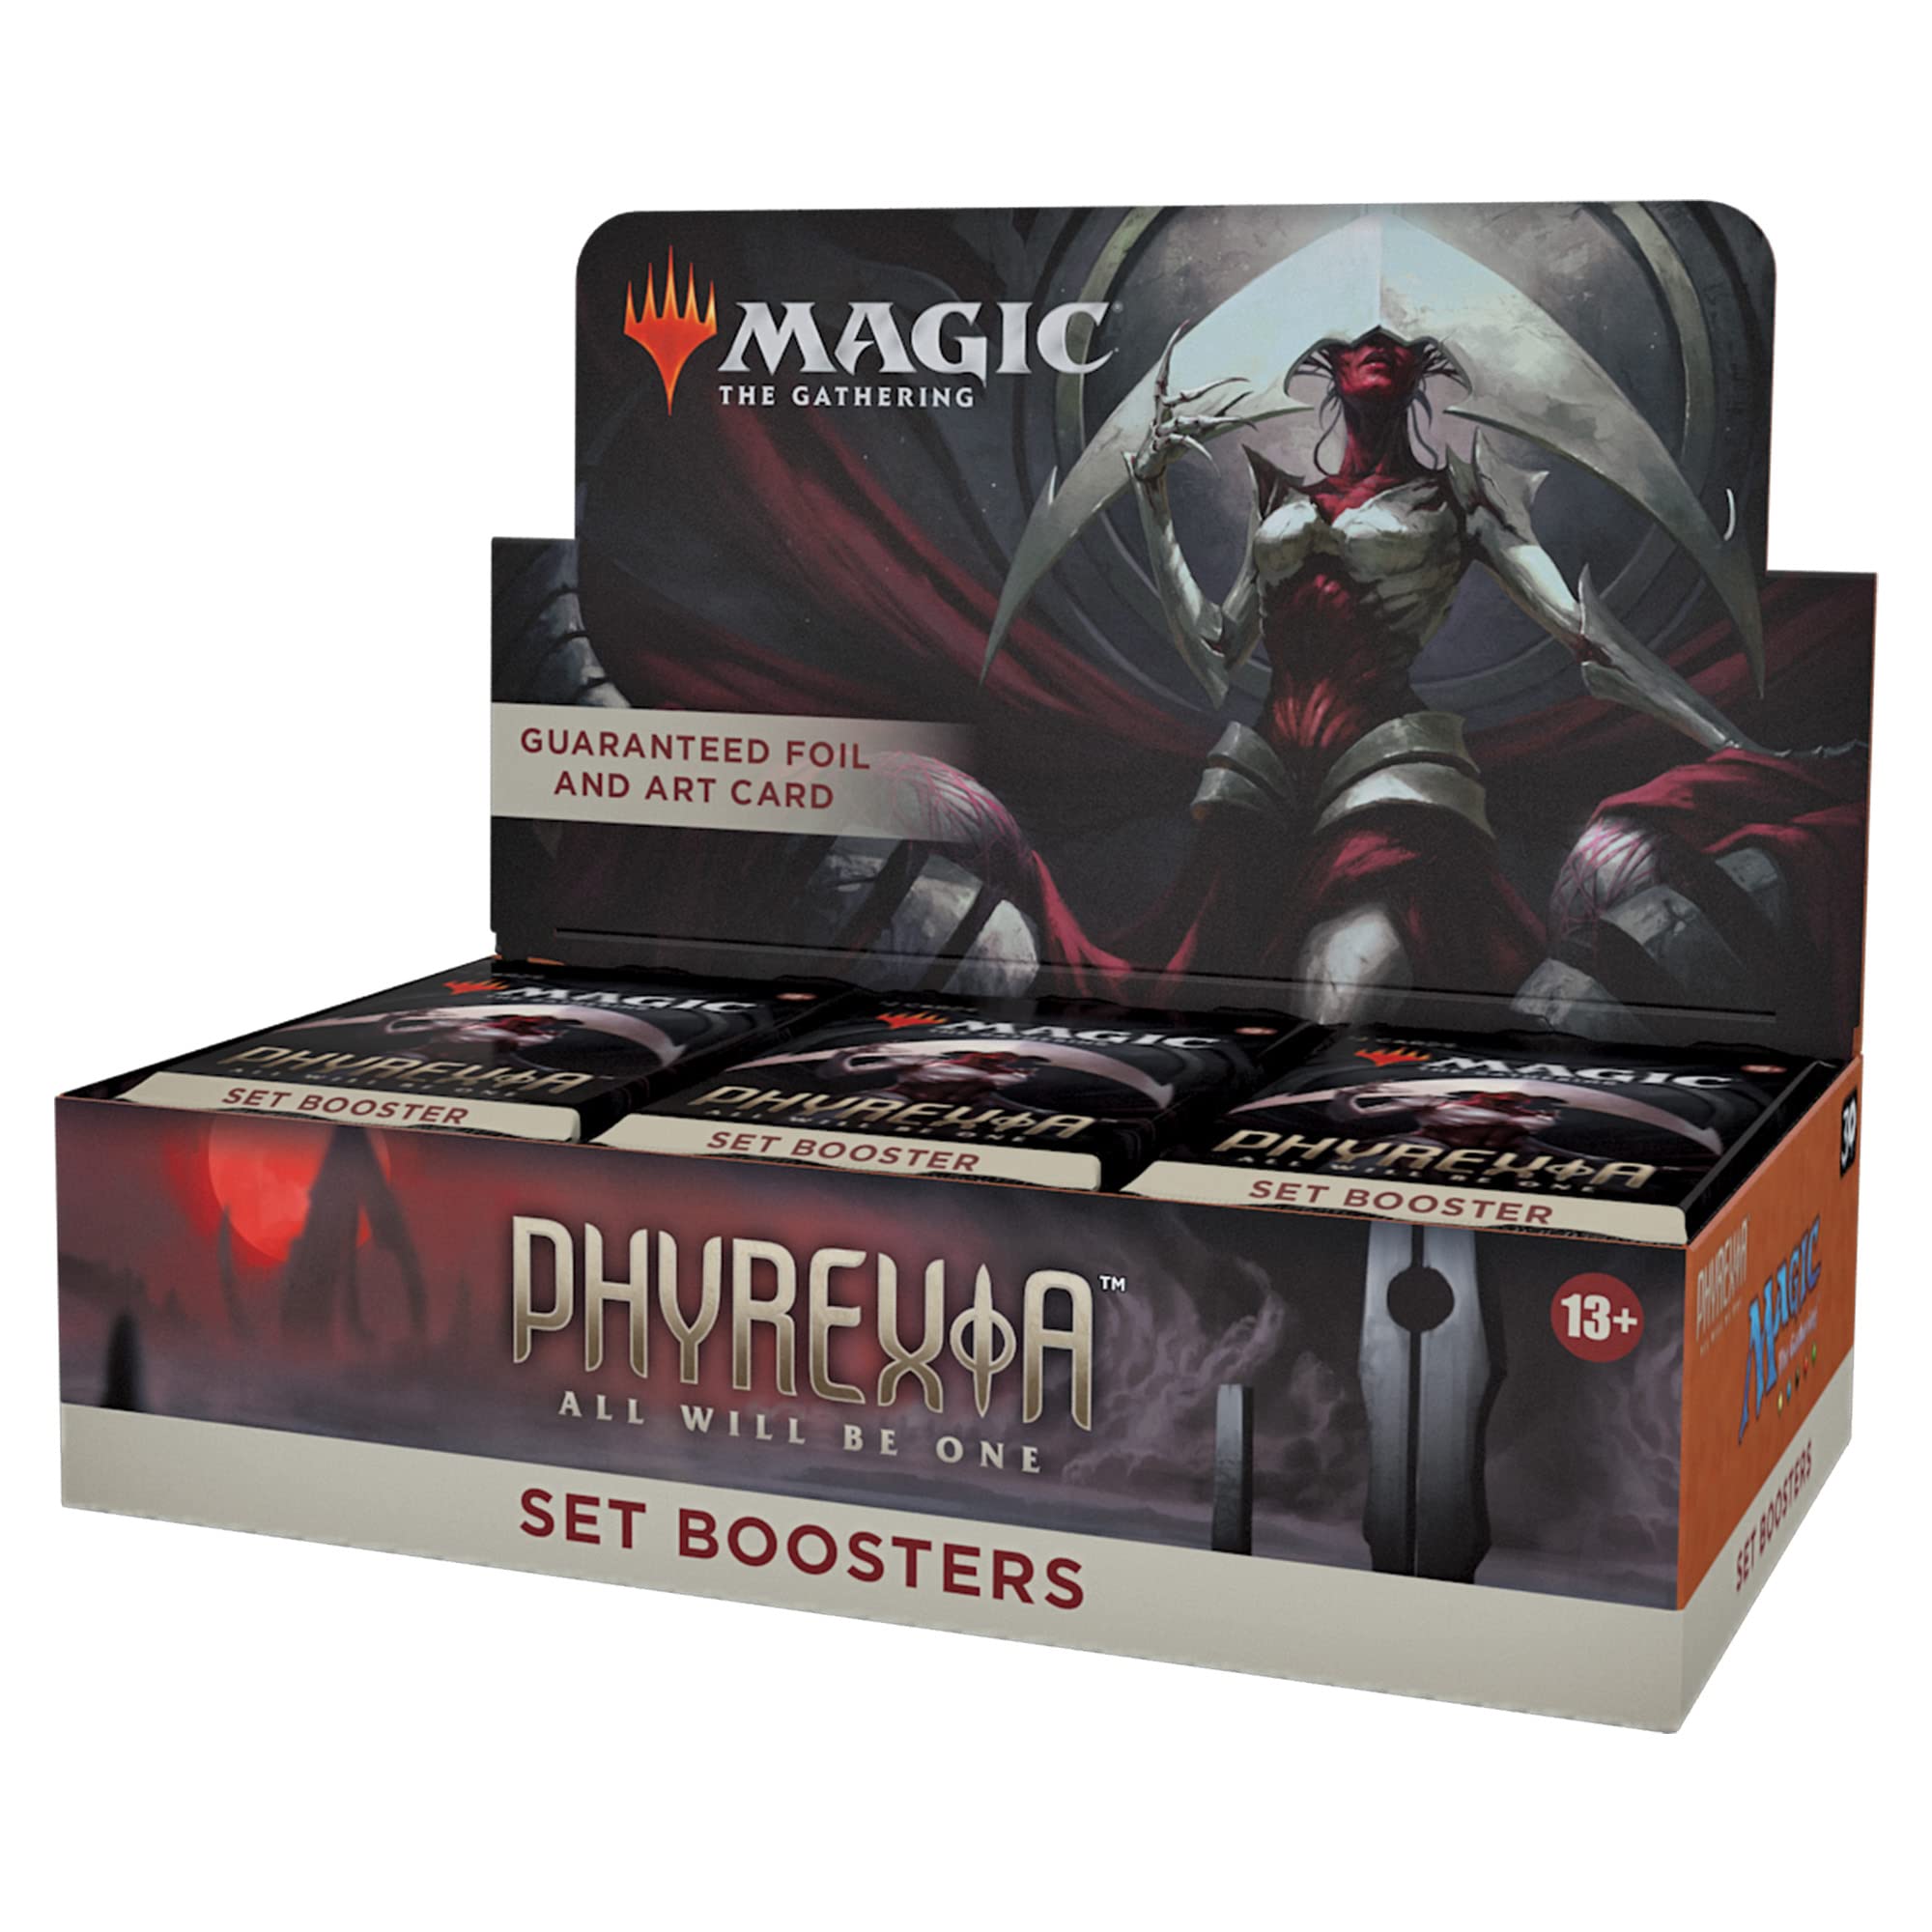 Magic The Gathering Magic: The Gathering Phyrexia: All Will Be One Set Booster Box | 30 Packs (360 Magic Cards)